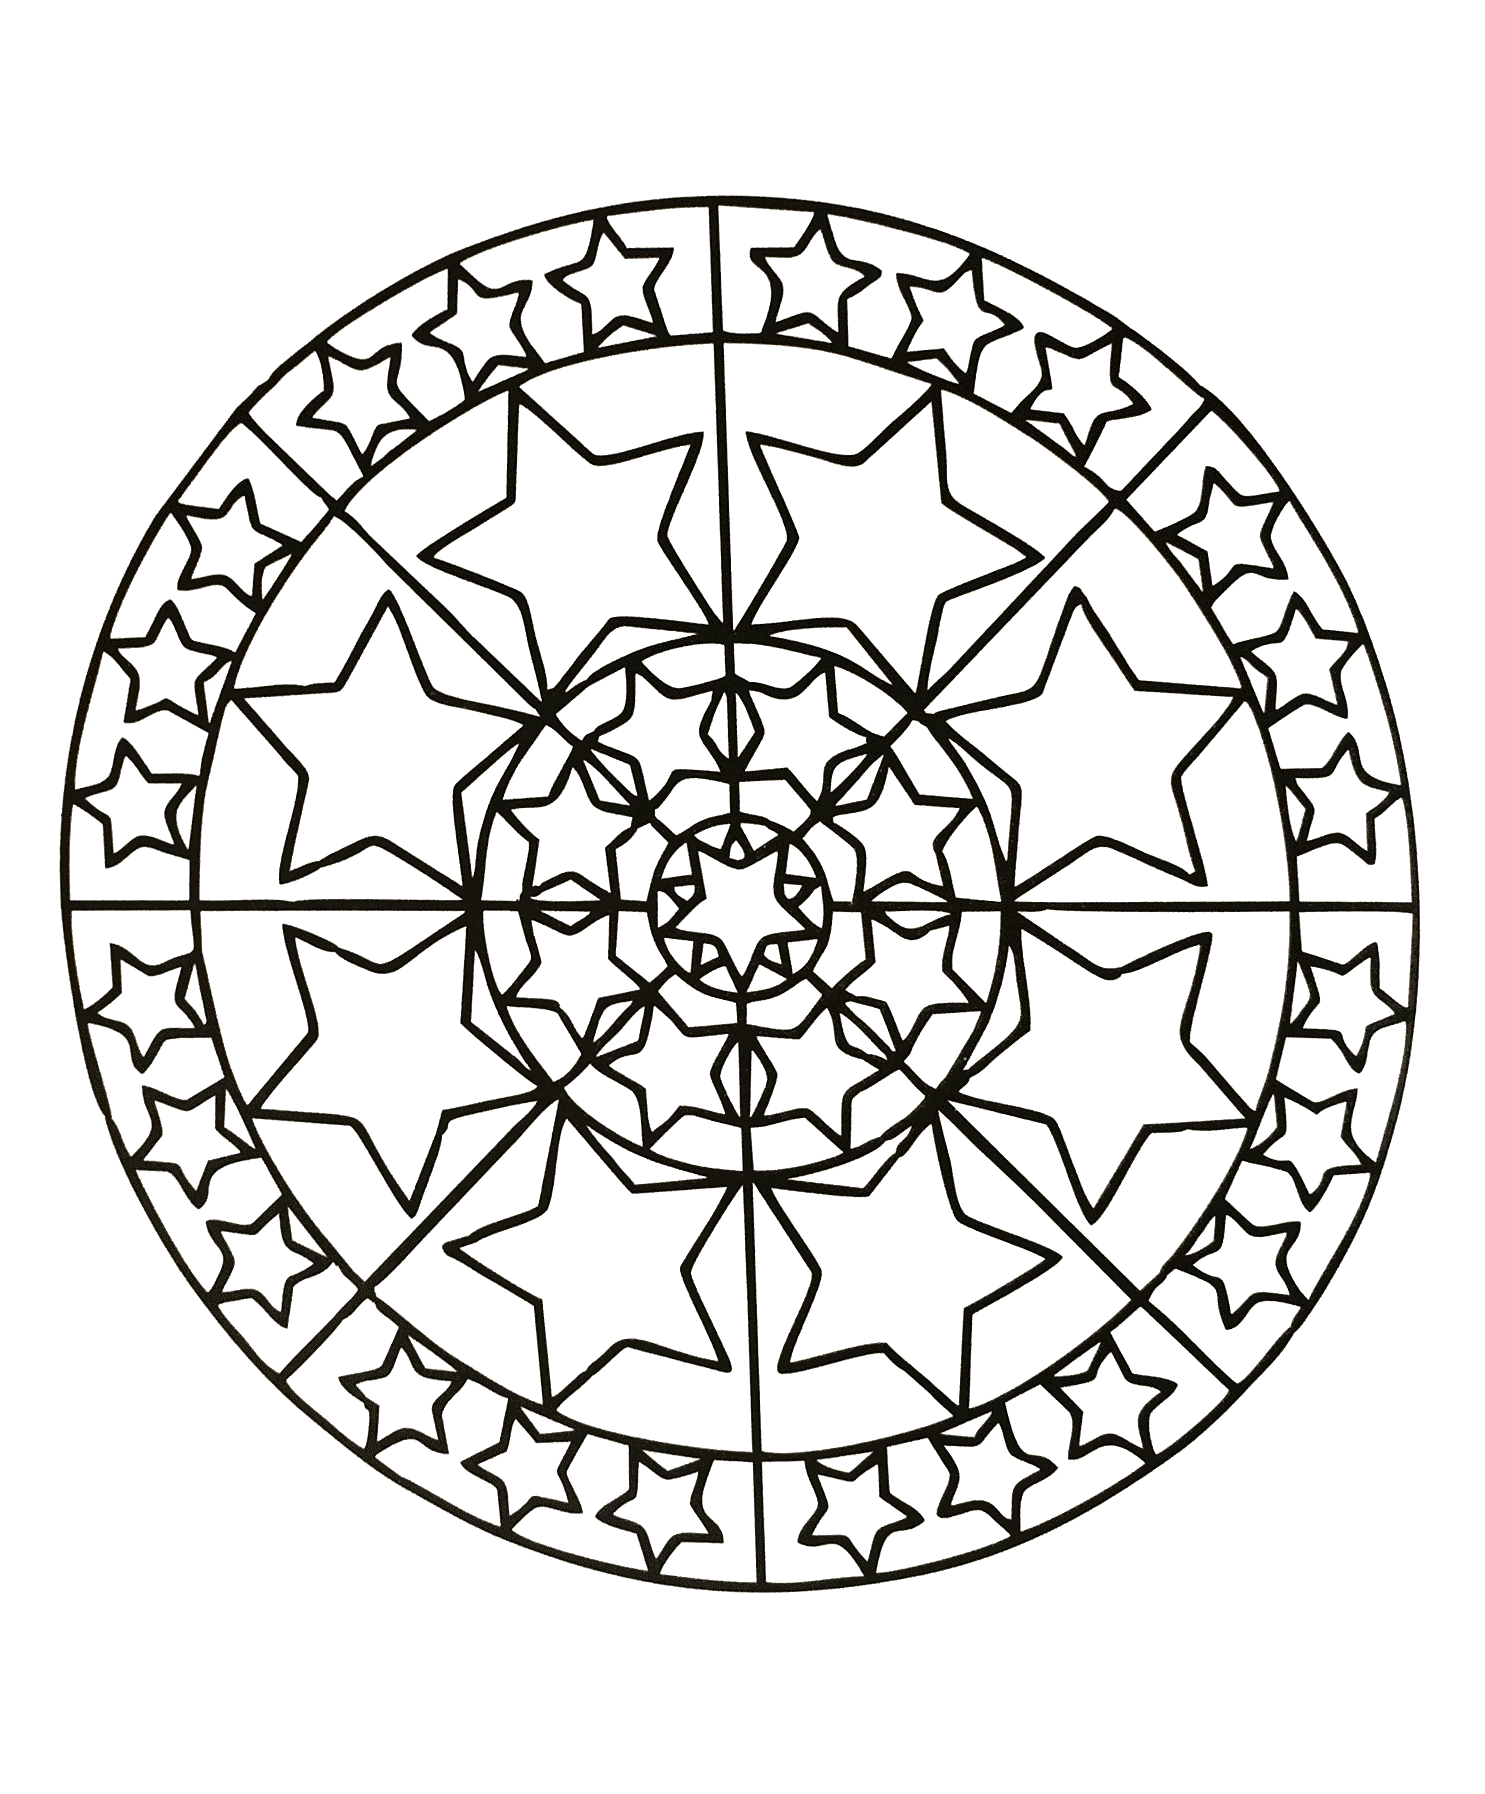 Mandalas to download for free - 13 - Image with : Star